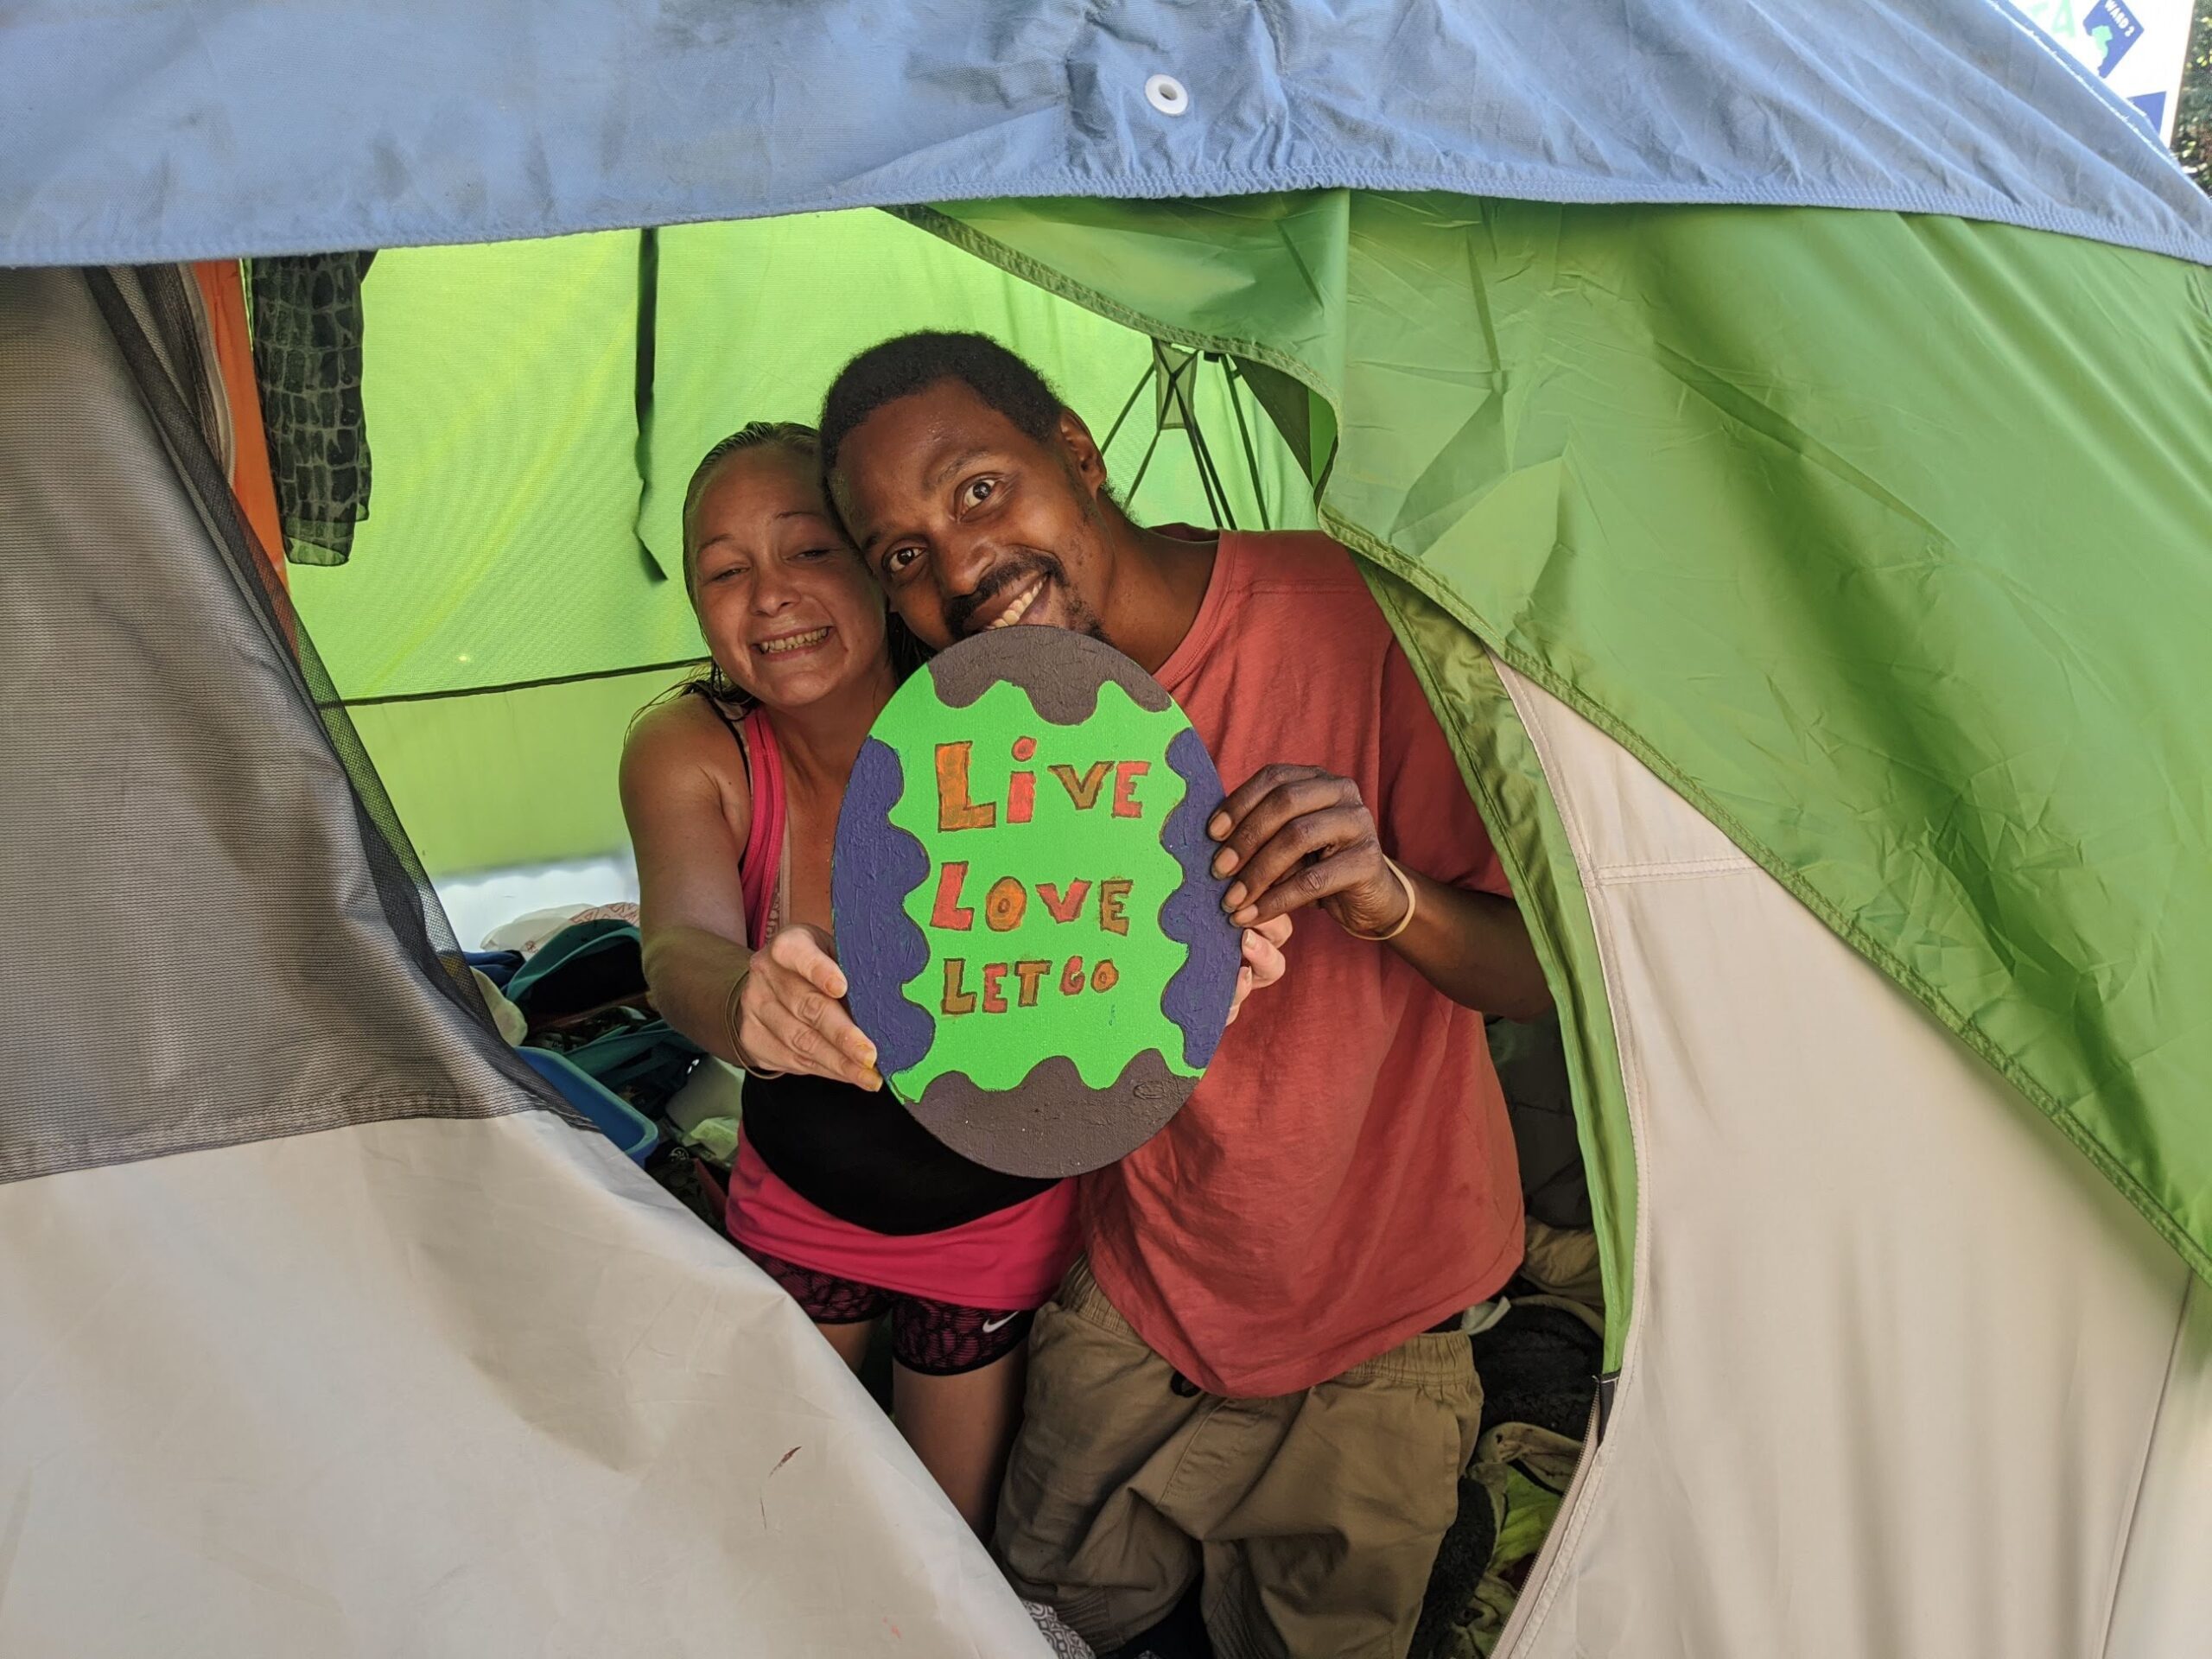 Picture of a woman and a man holding up a hand-painted sign that says "Live Love Let Go" as they kneel inside of a green and gray tent with the entry flap open.